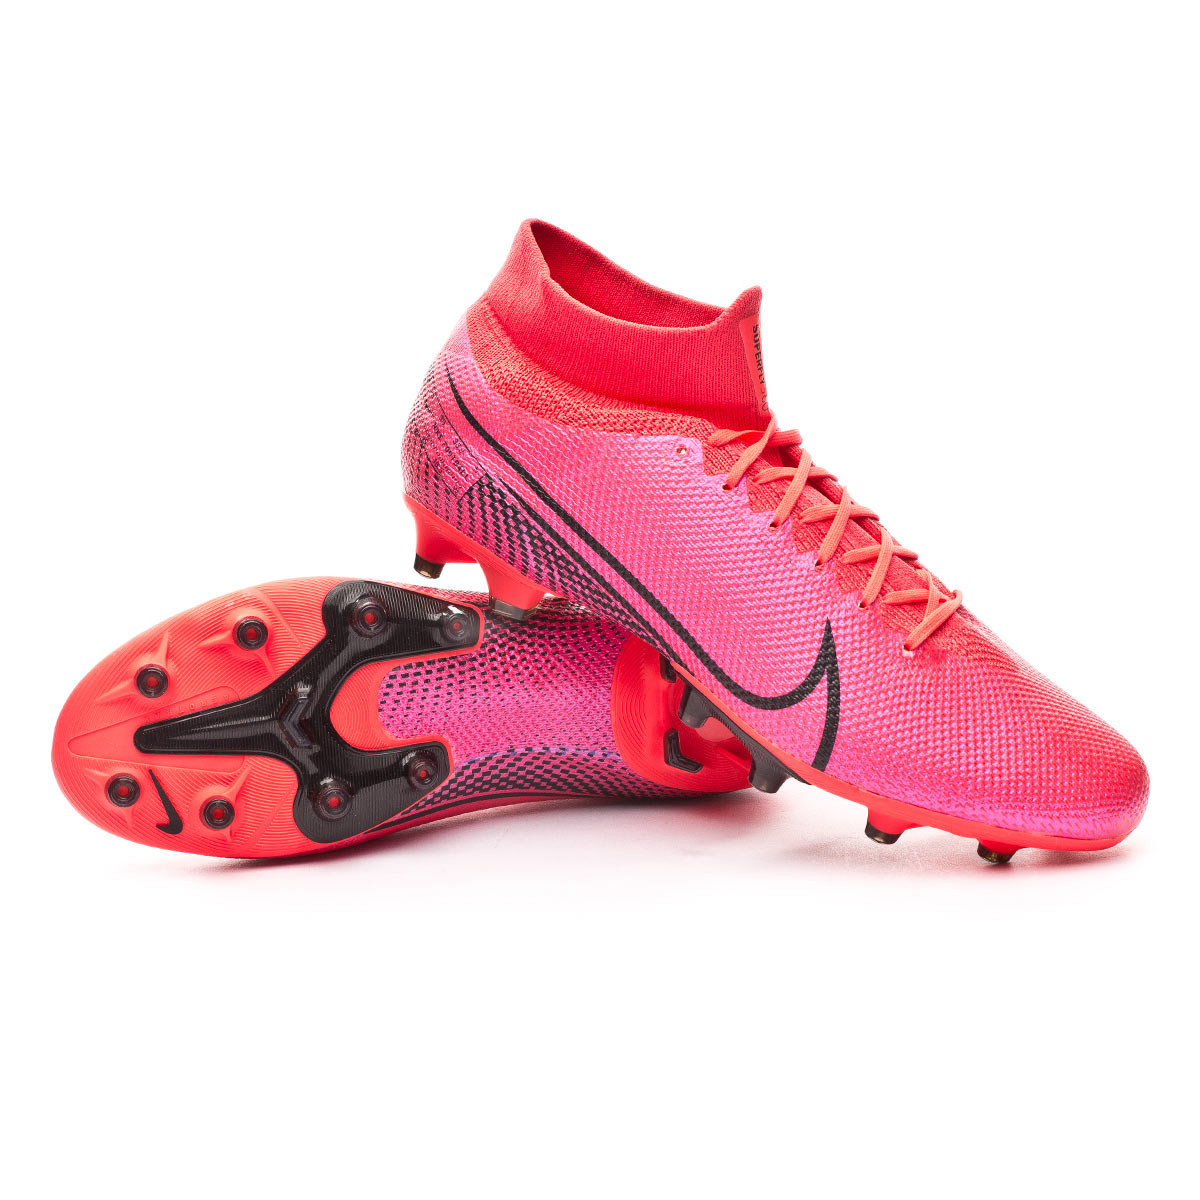 Nike Men 's Superfly 6 Pro FG Firm Ground Soccer Cleats Volt.